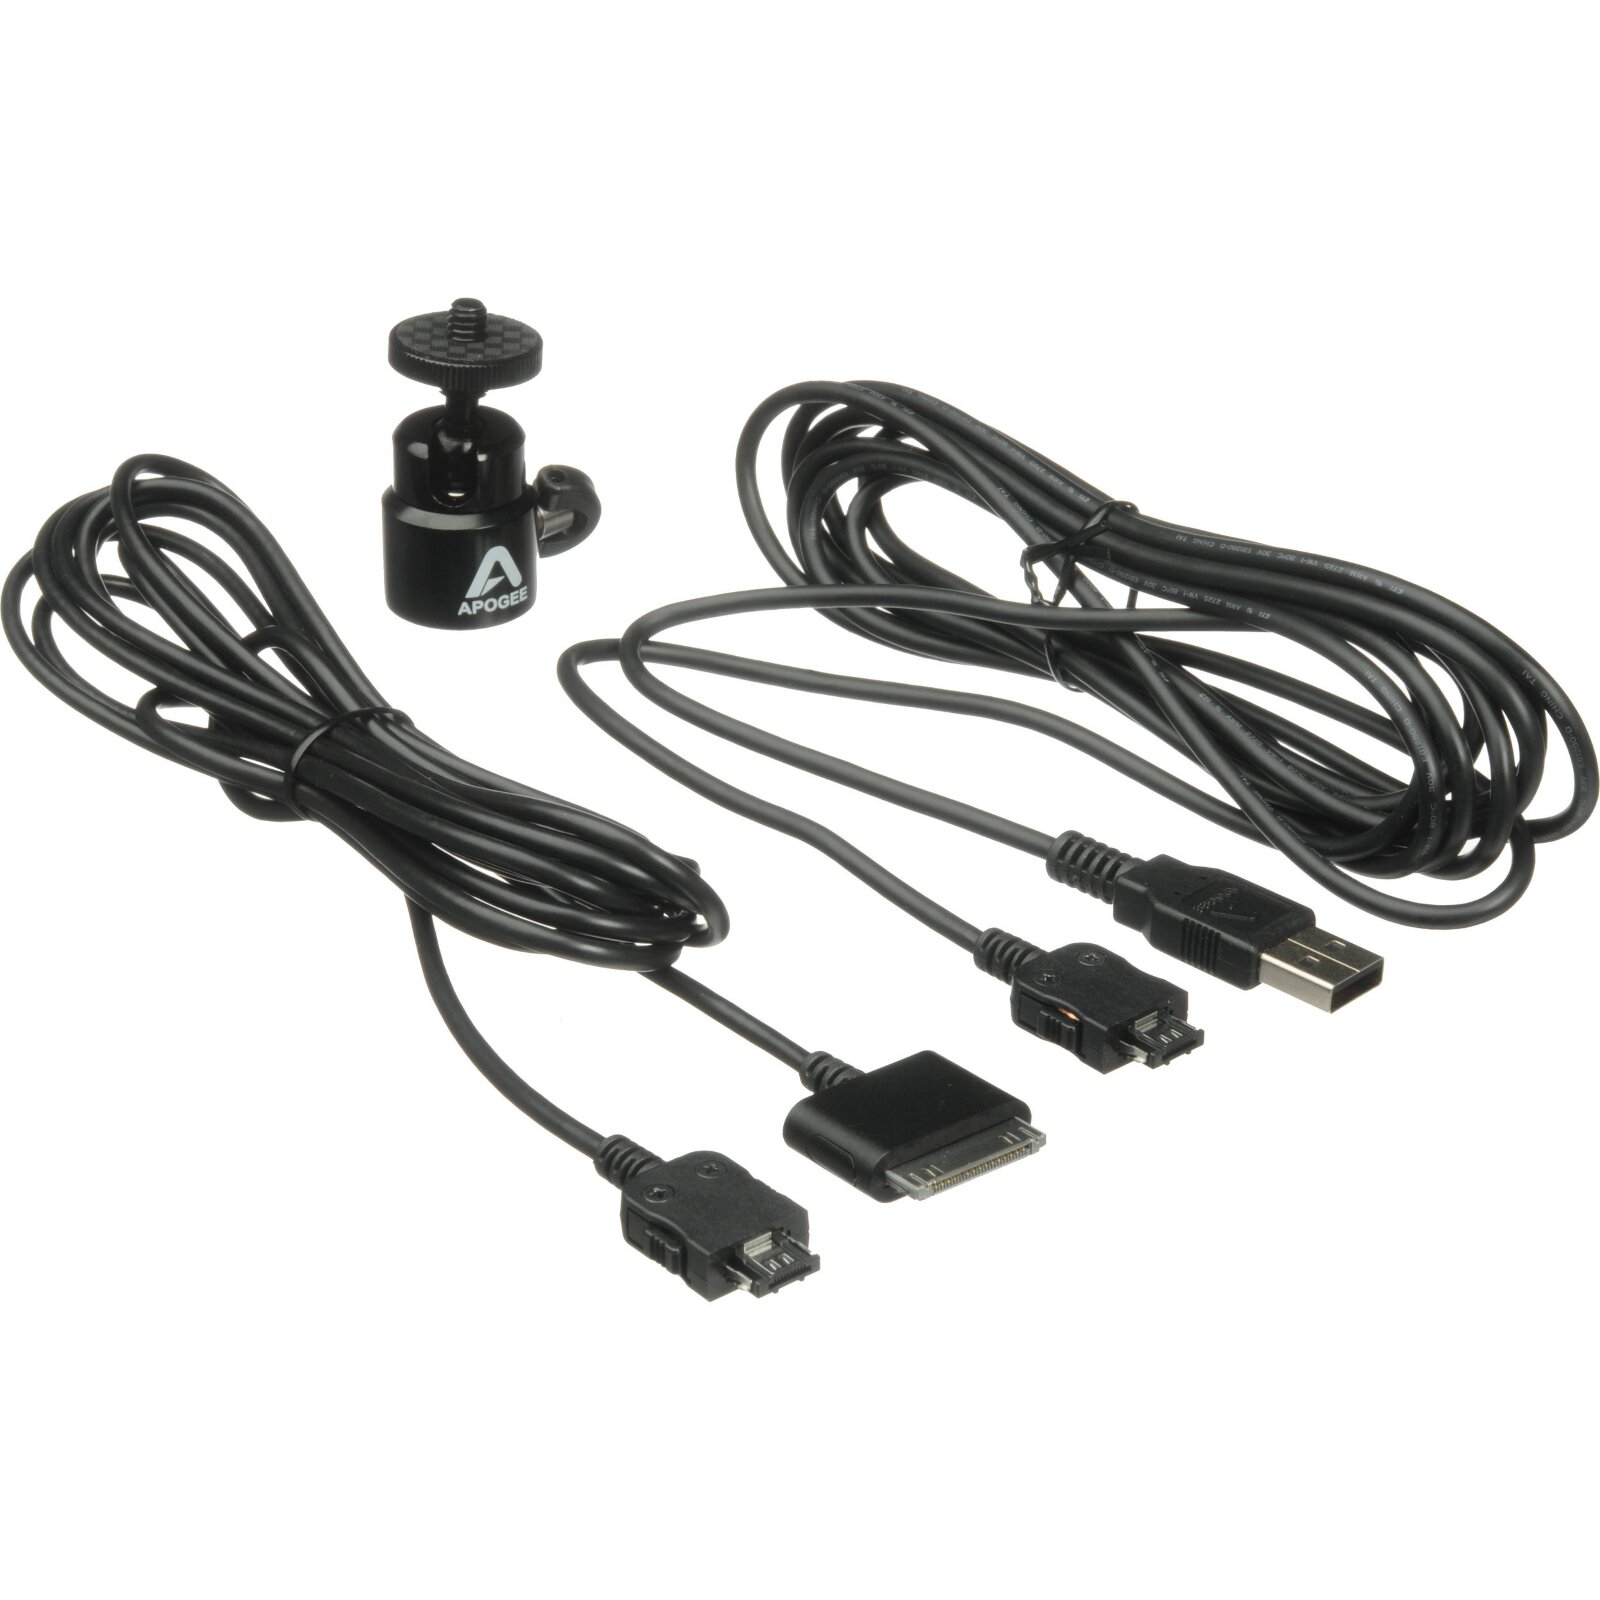 Apogee Electronics MiC Cable & Adapter Kit : photo 1